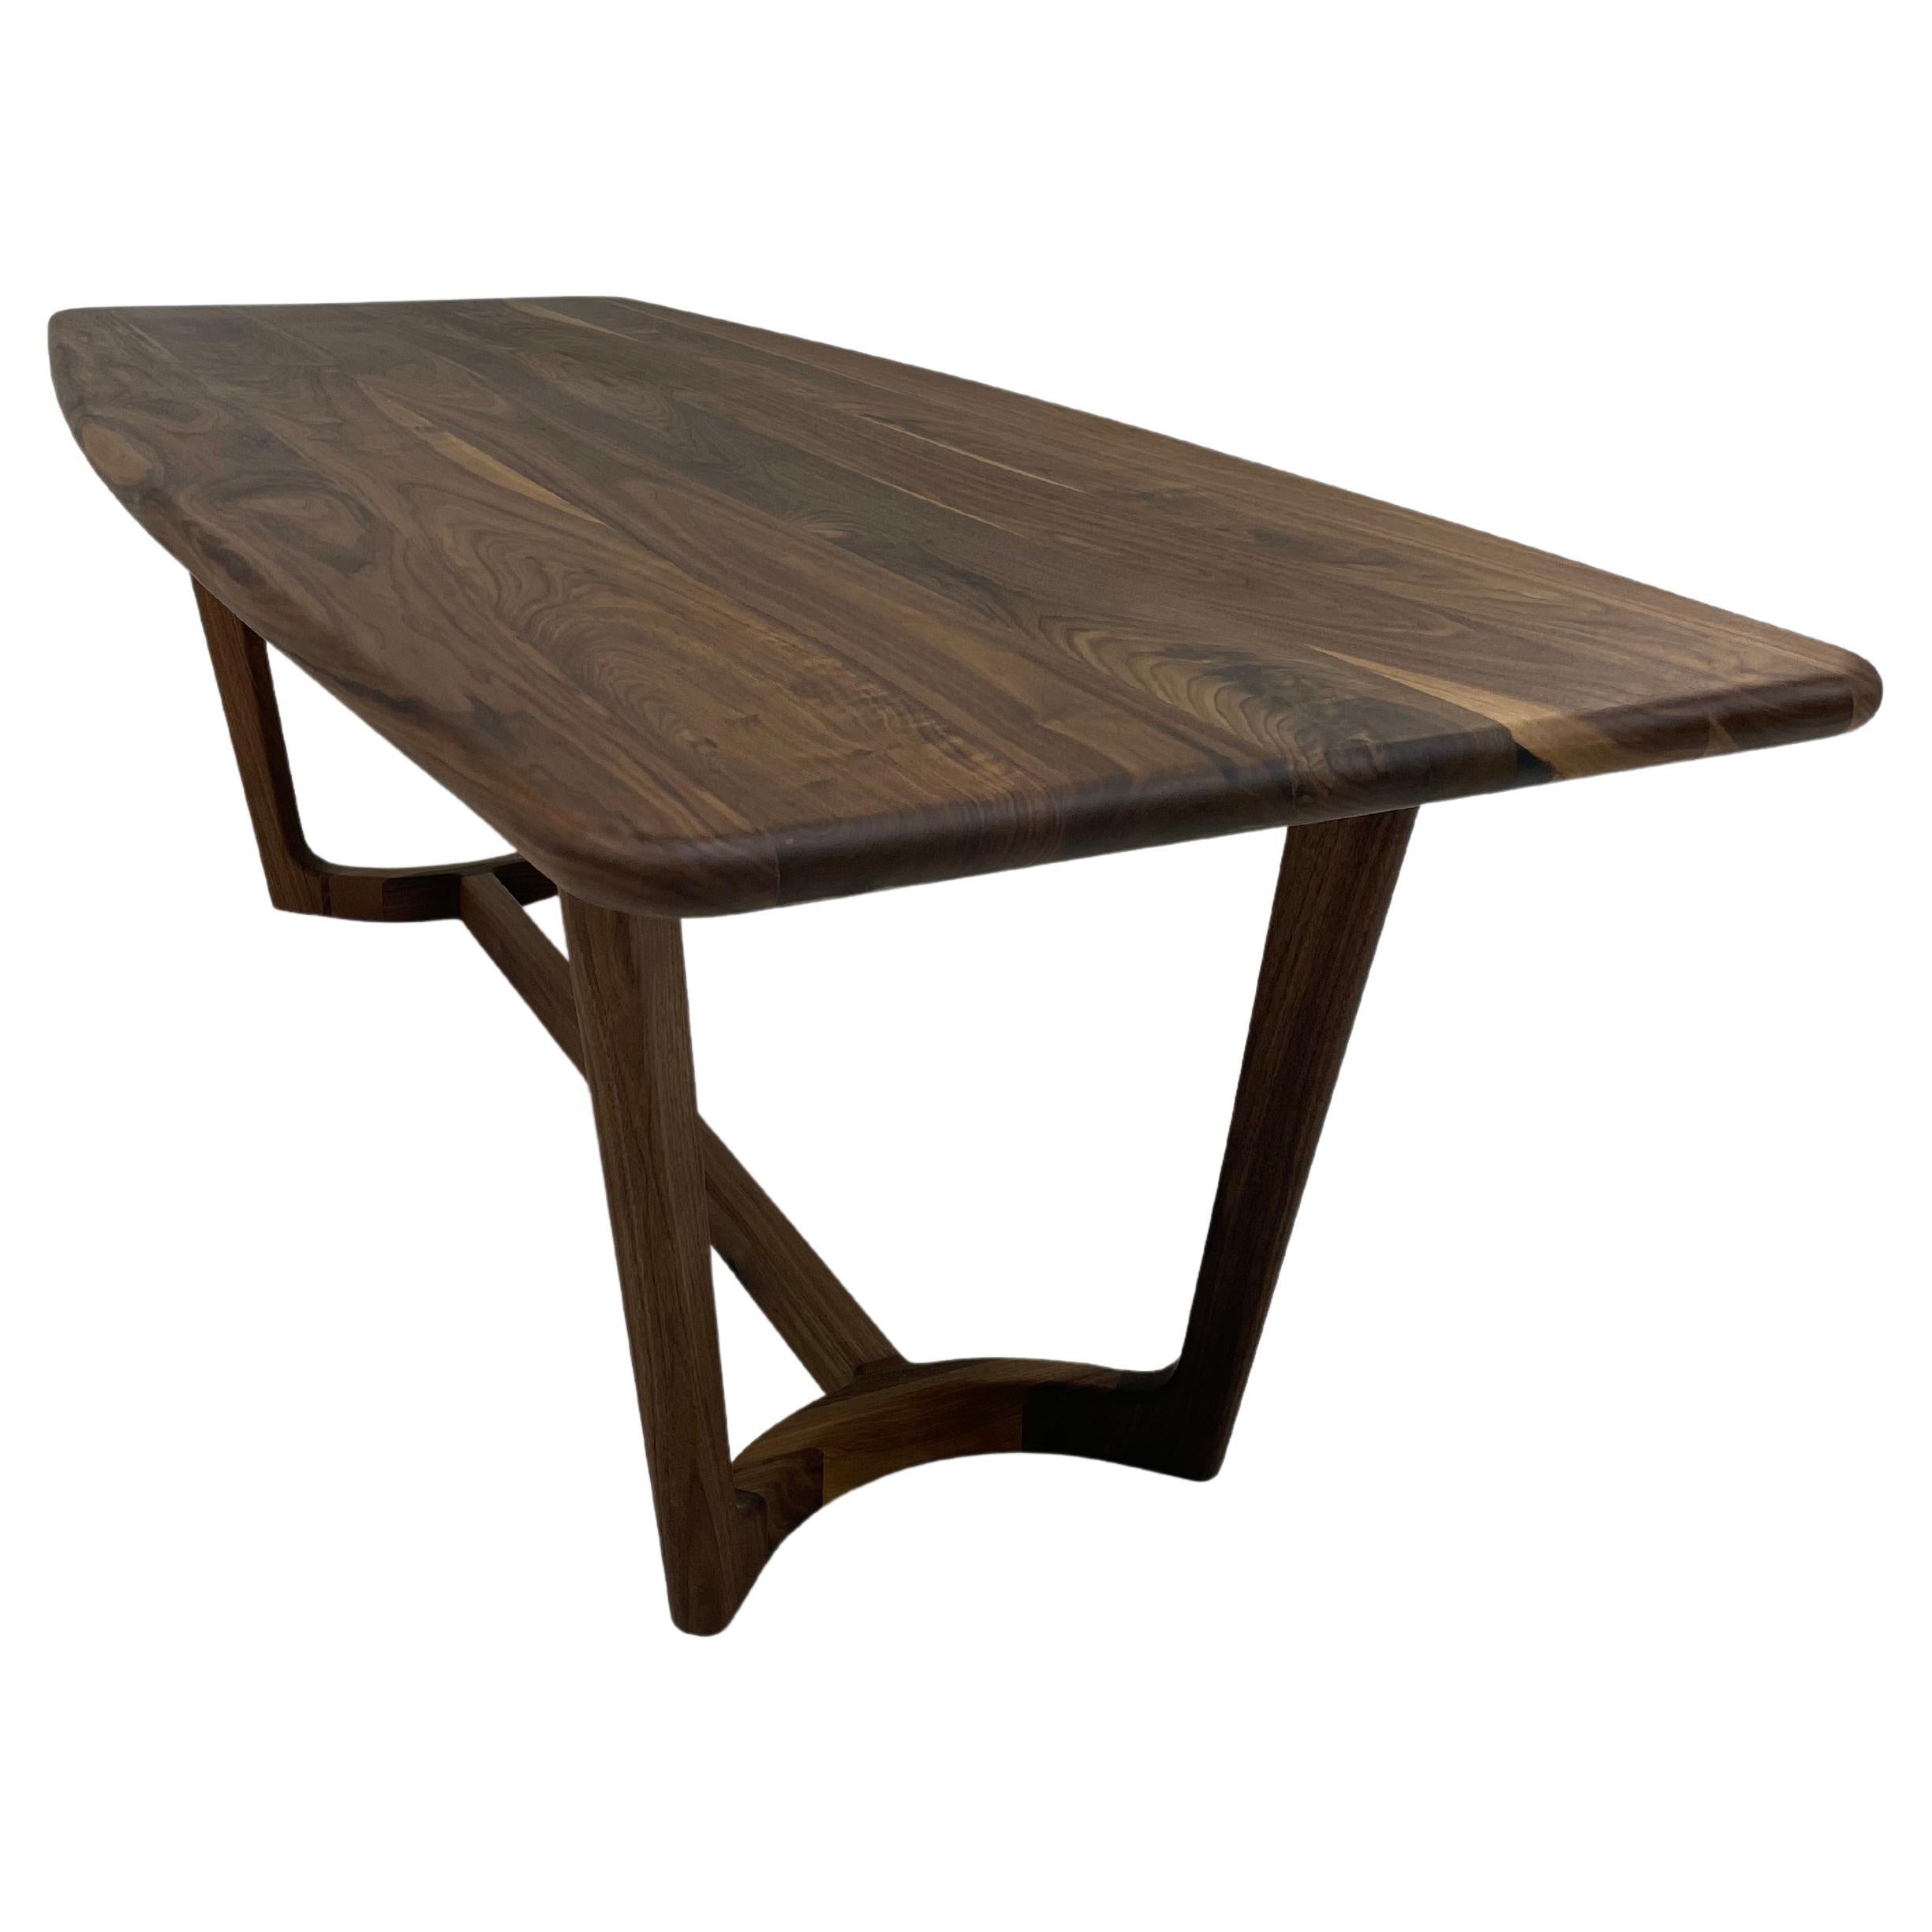 Modern Walnut Hilda Dining Table From The Signature Series By Pompous Fox